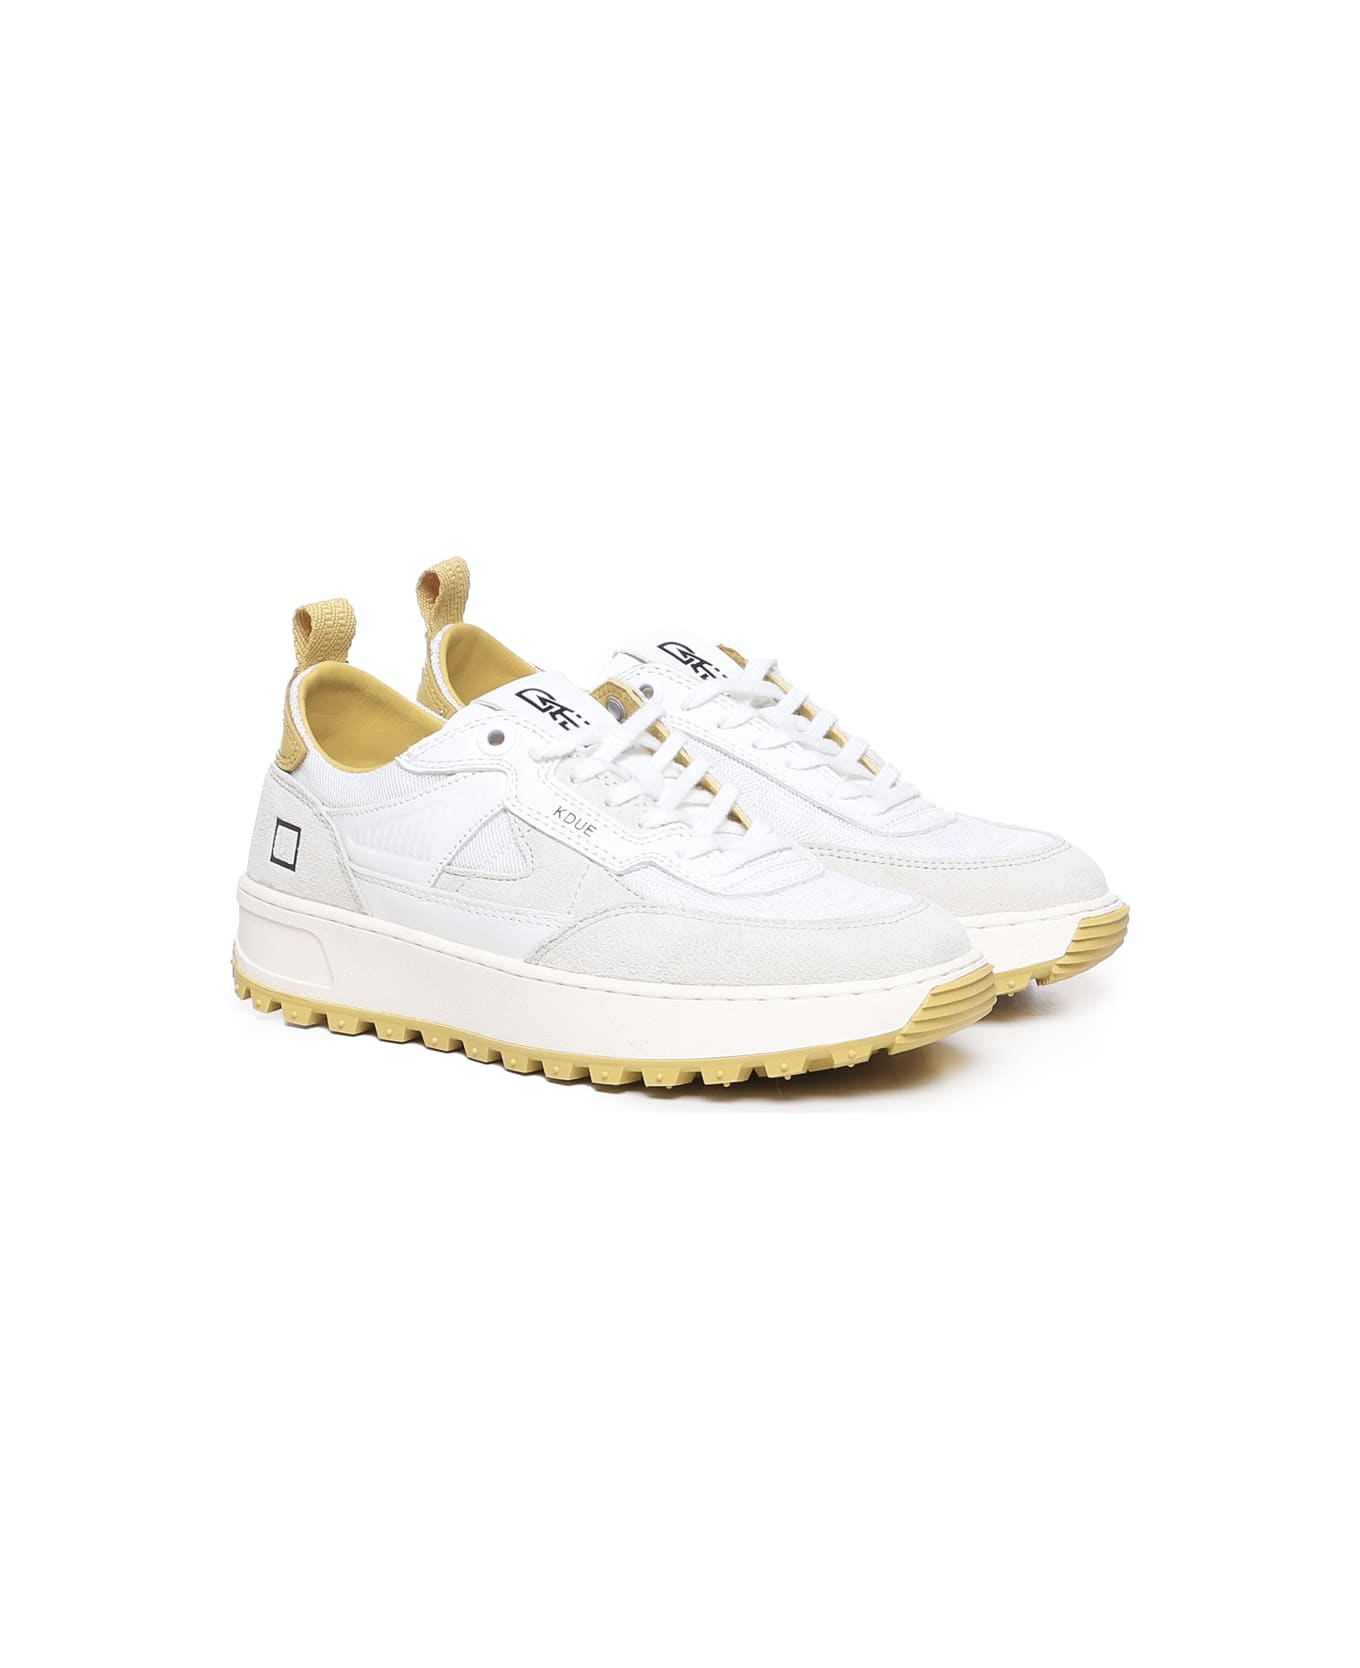 D.A.T.E. Kdue Sneakers - White-yellow